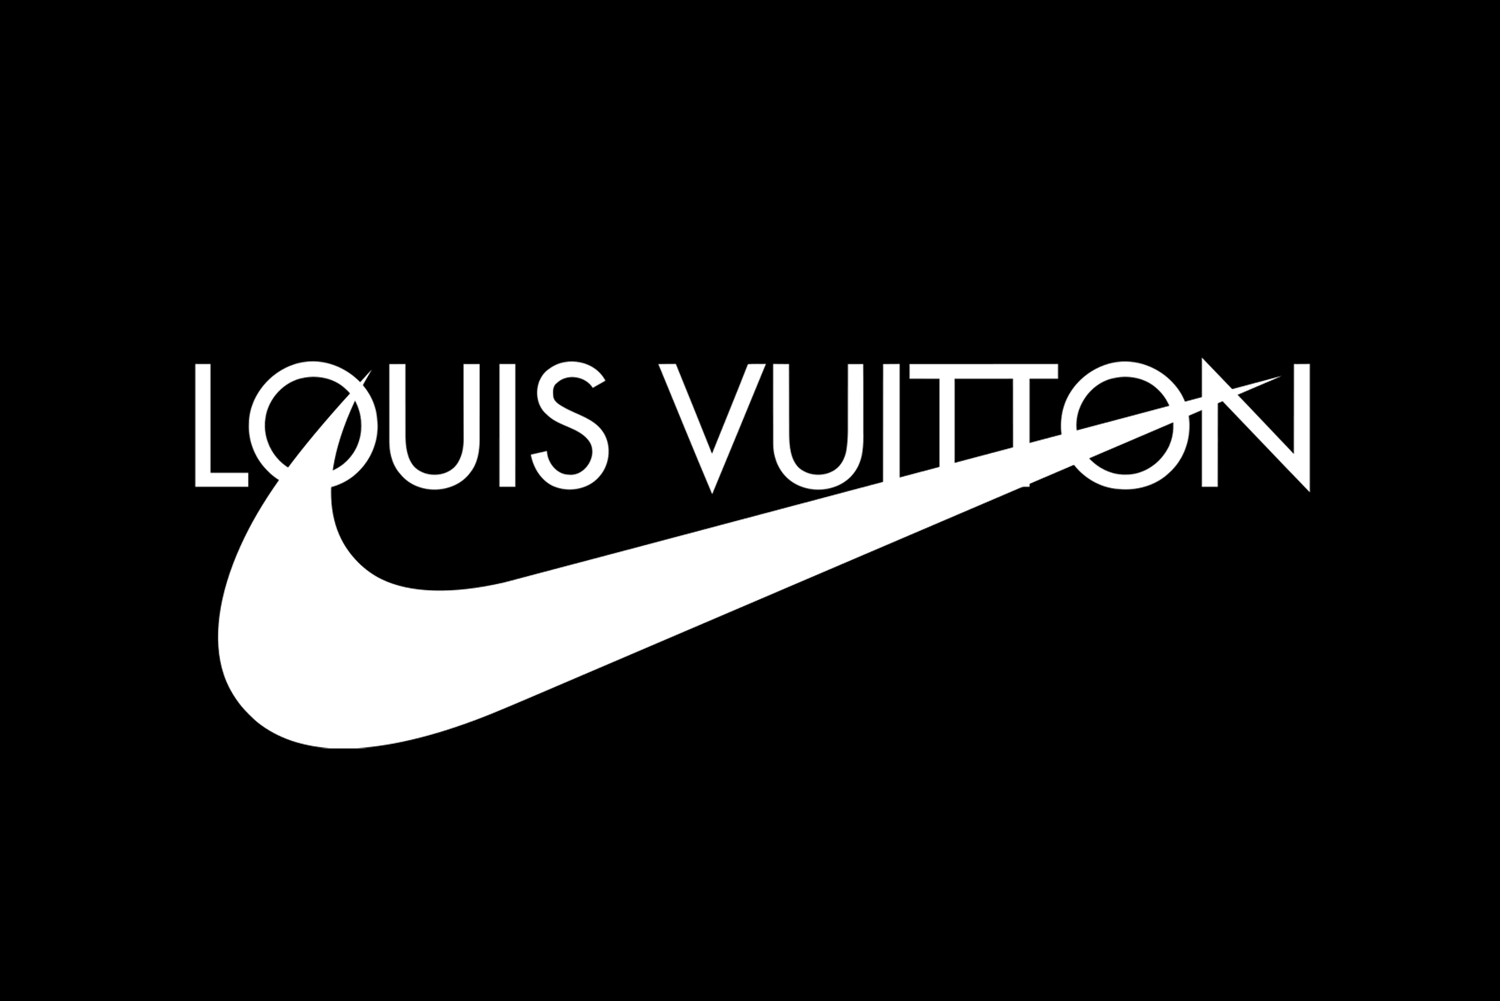 From Palace x Gucci To Louis Vuitton x Nike, Here Are Our Global